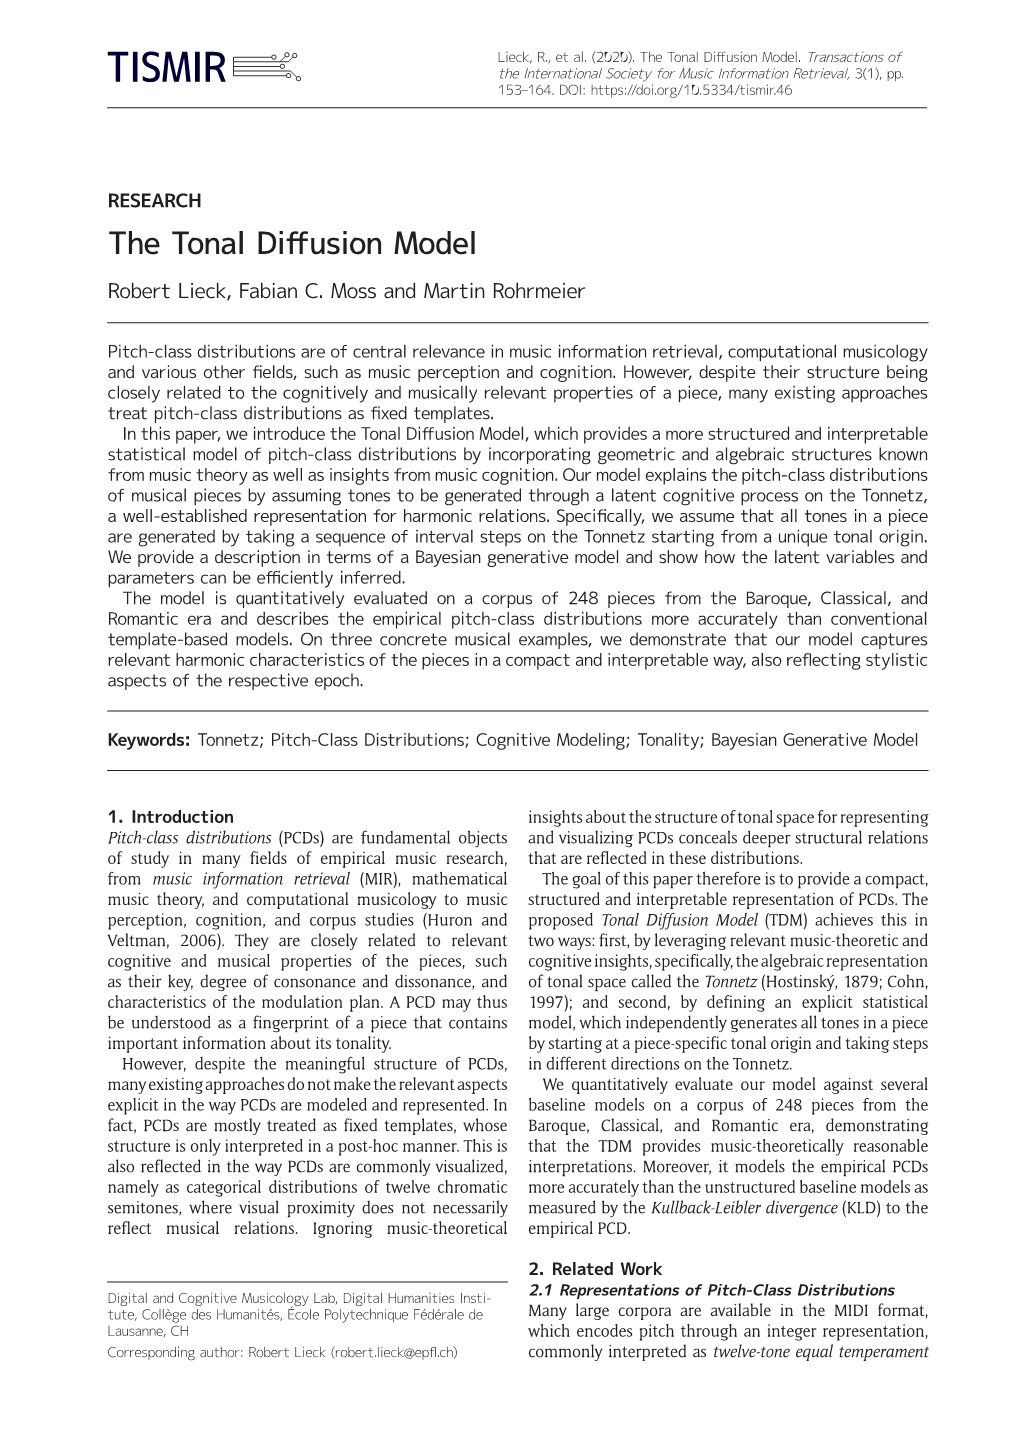 The Tonal Diffusion Model.Transactions of the International Society for Music Information Retrieval, 3(1), Pp